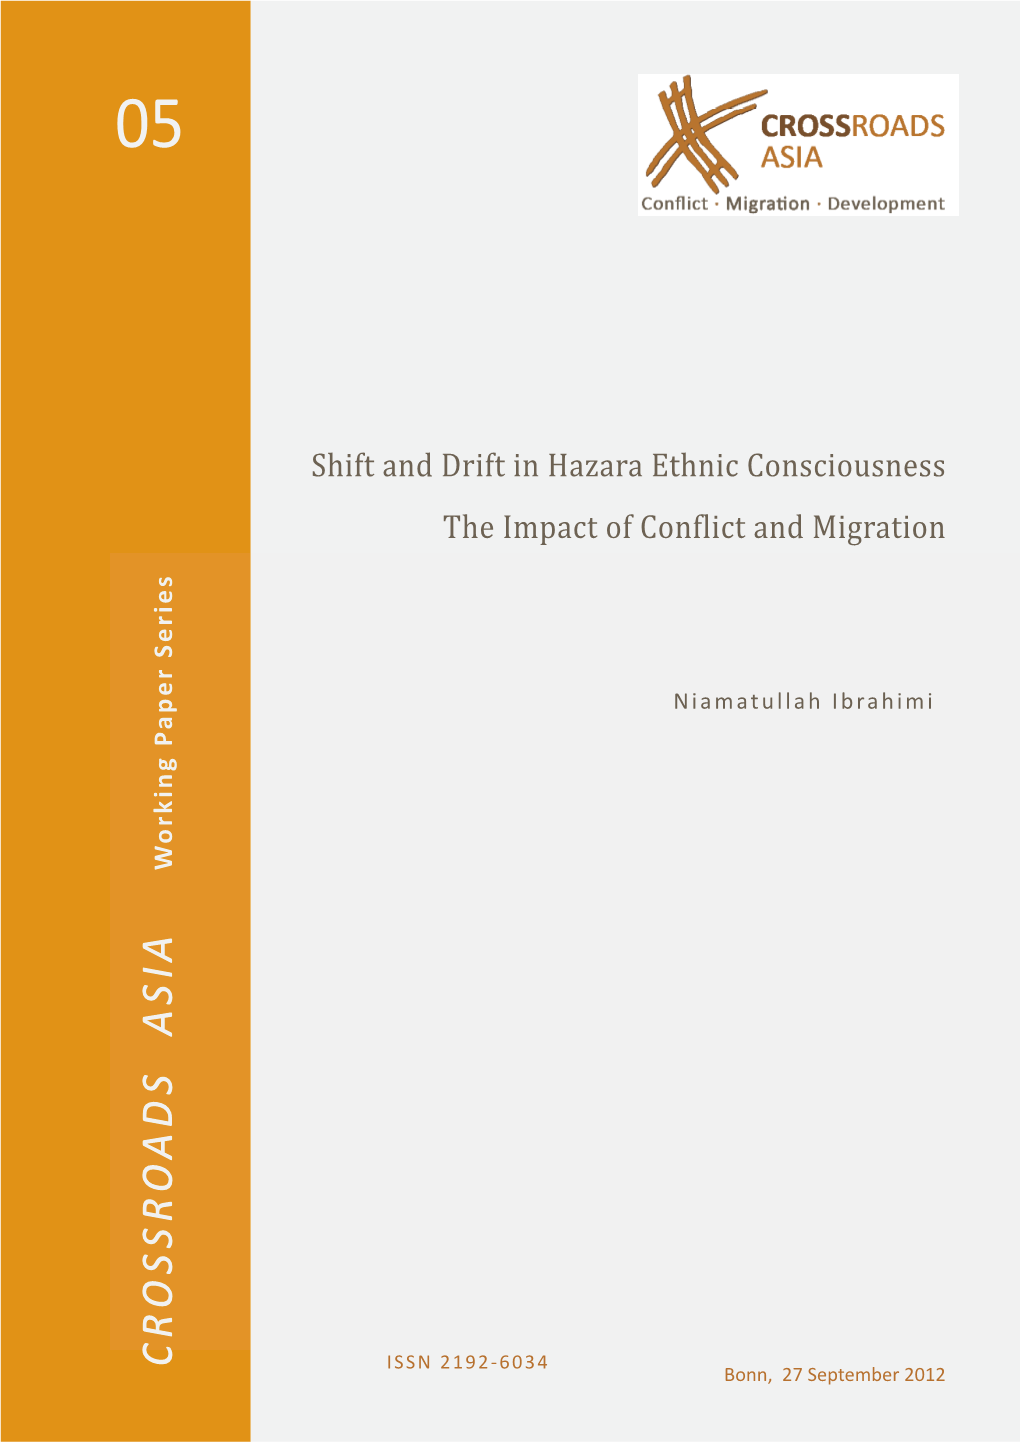 The Shift and Drift in Hazara Ethnic Consciousness